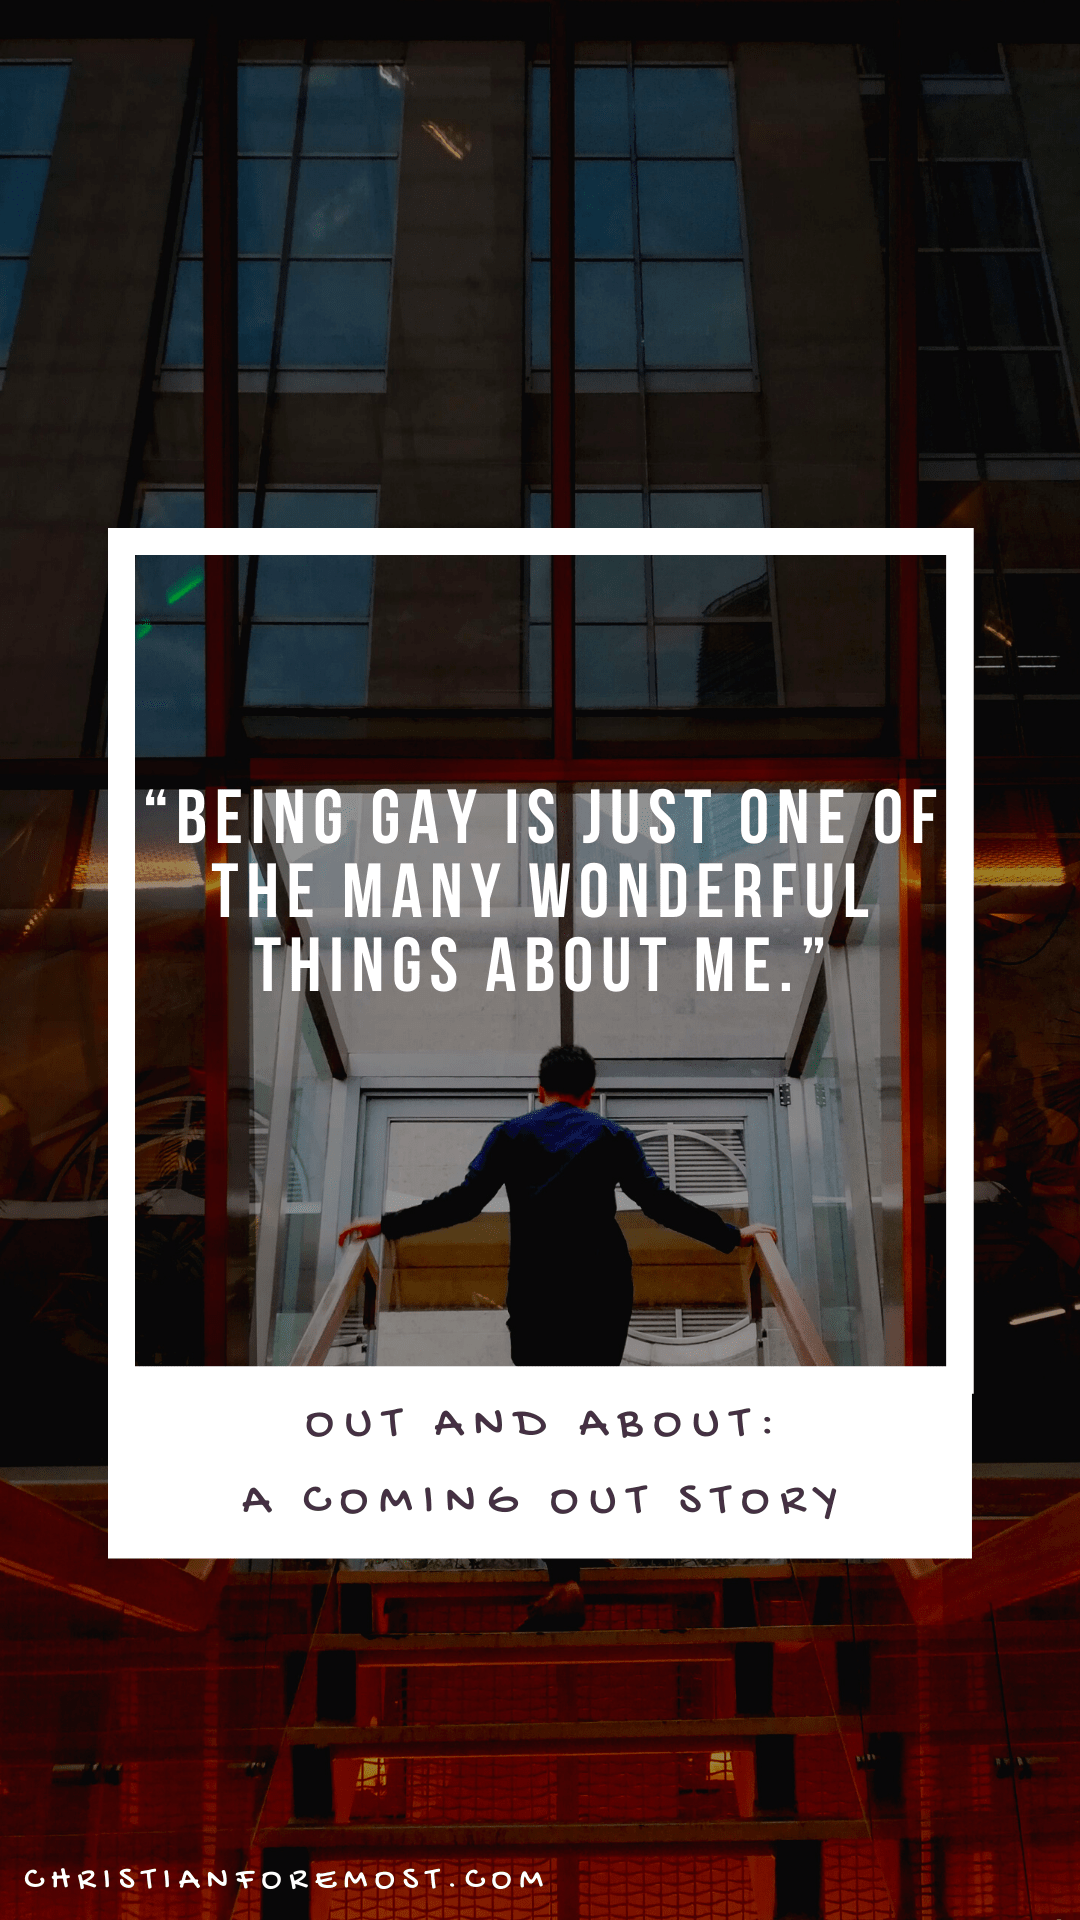 Out and About: A Coming Out Story